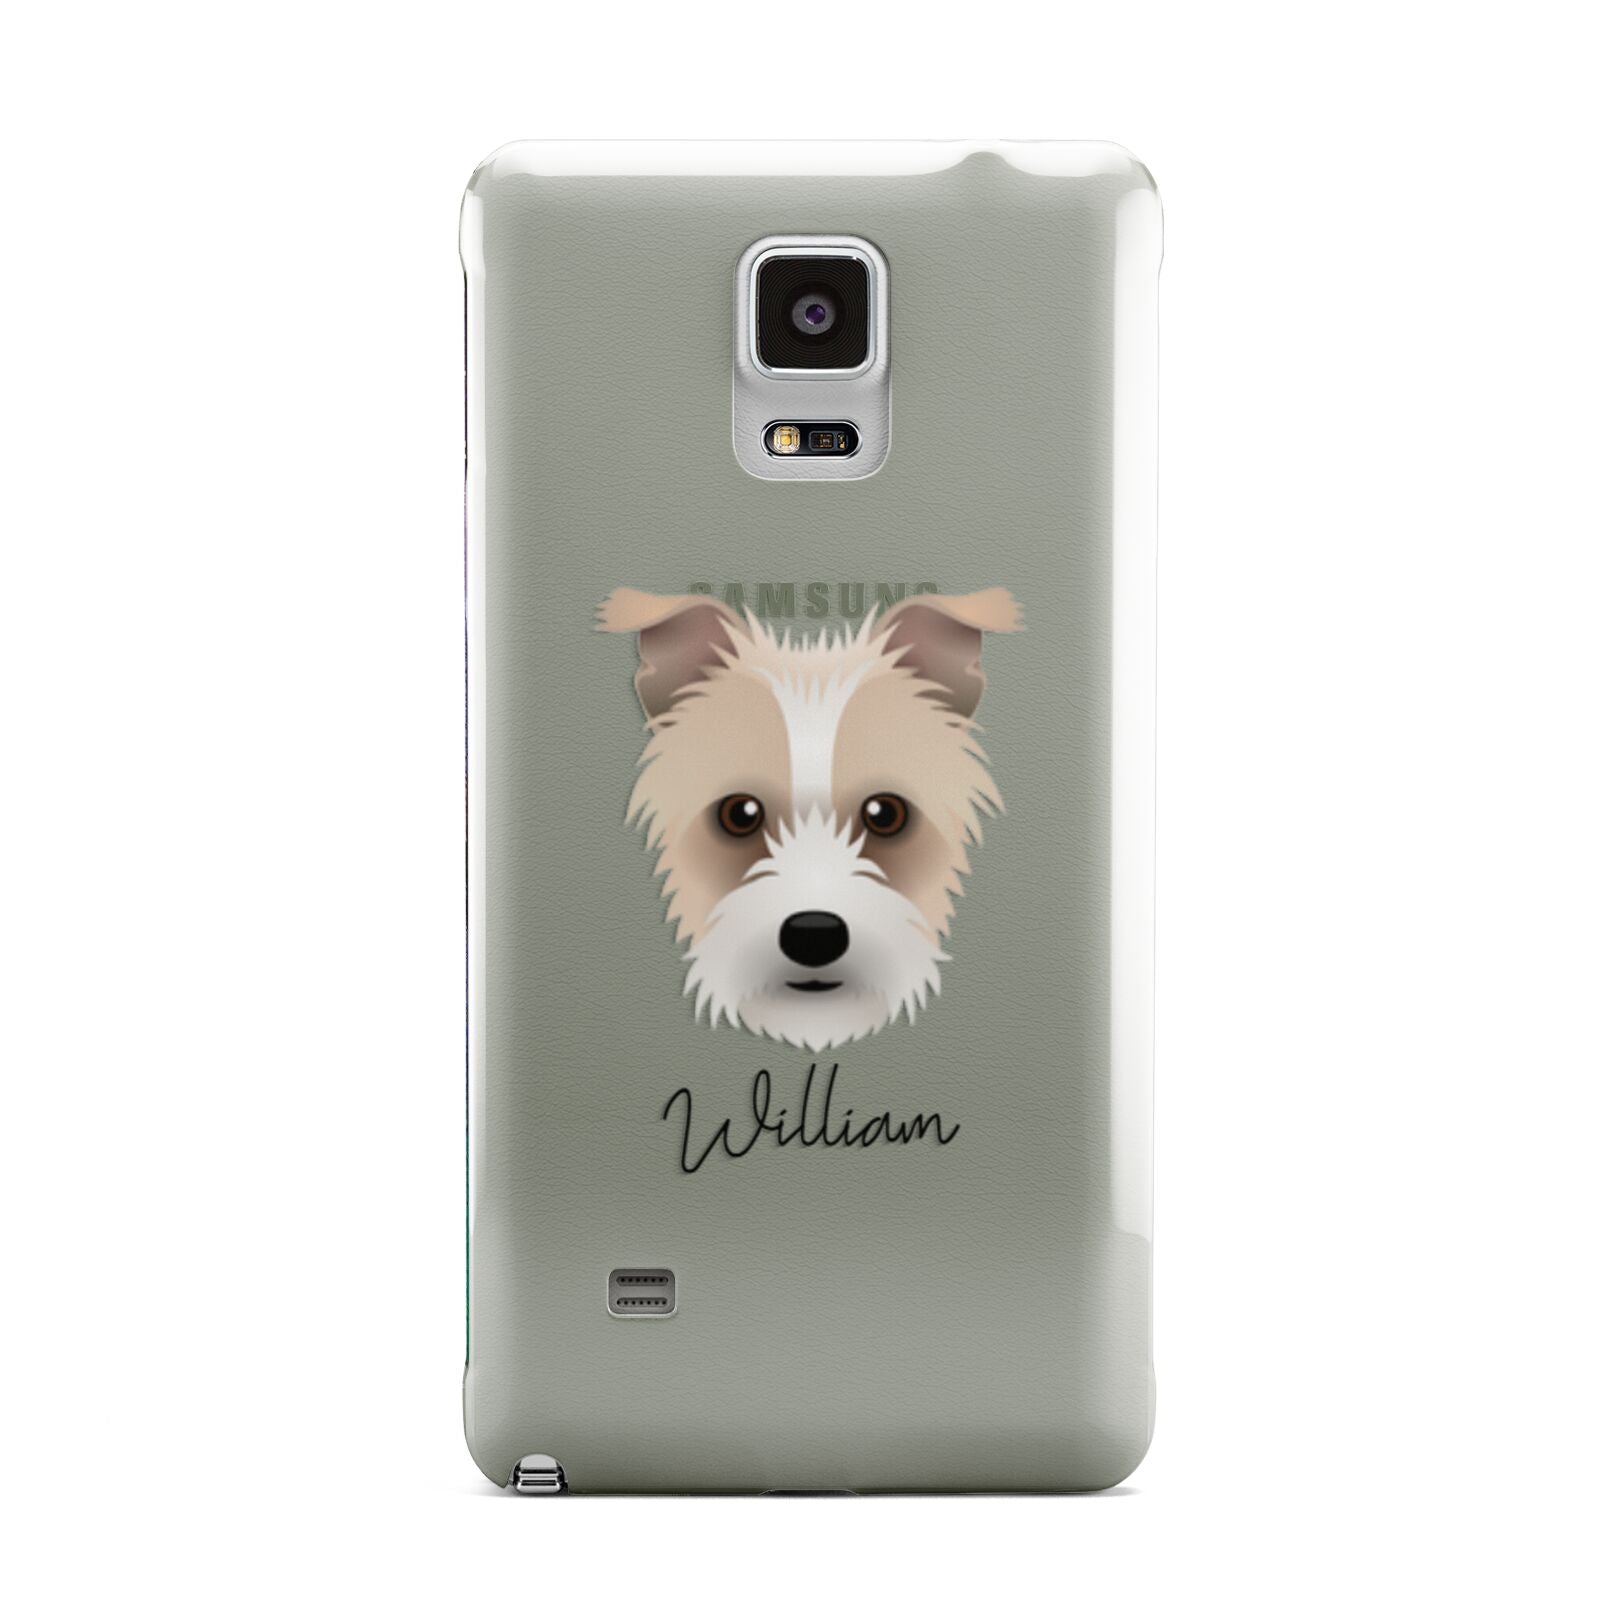 Sporting Lucas Terrier Personalised Samsung Galaxy Note 4 Case